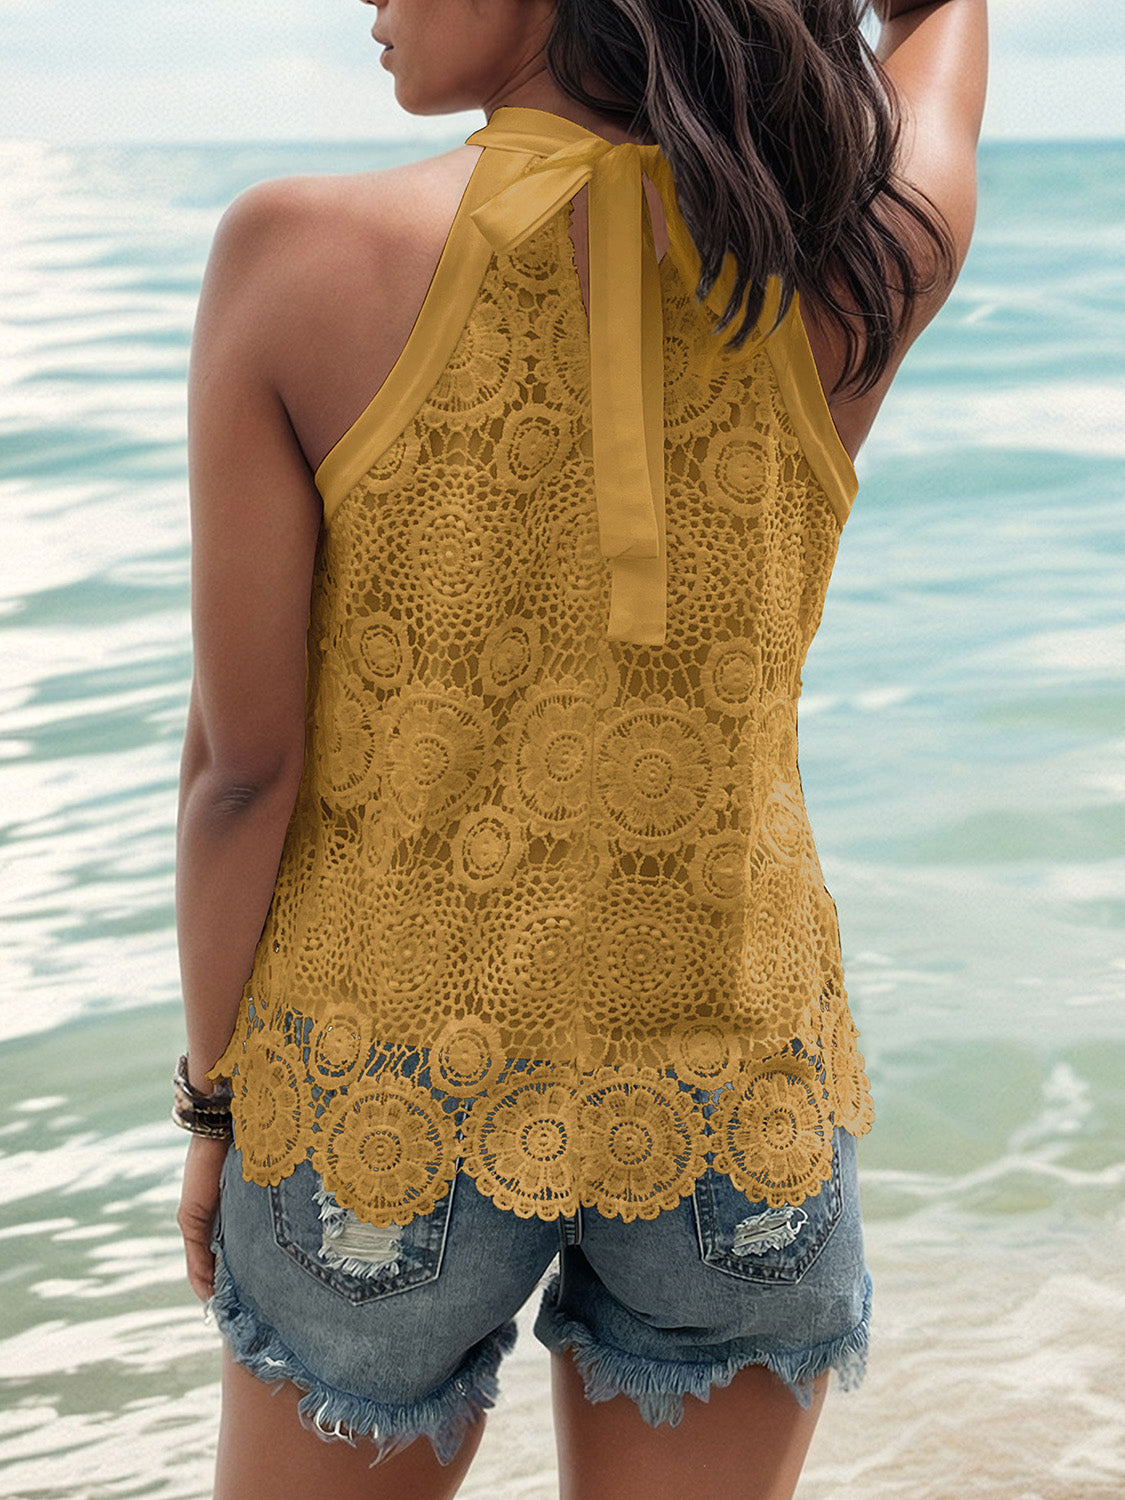 Elevate your style with our Lace Tied Mock Neck Tank. Perfect for any occasion, it blends elegance with comfort in 5 stunning colors.